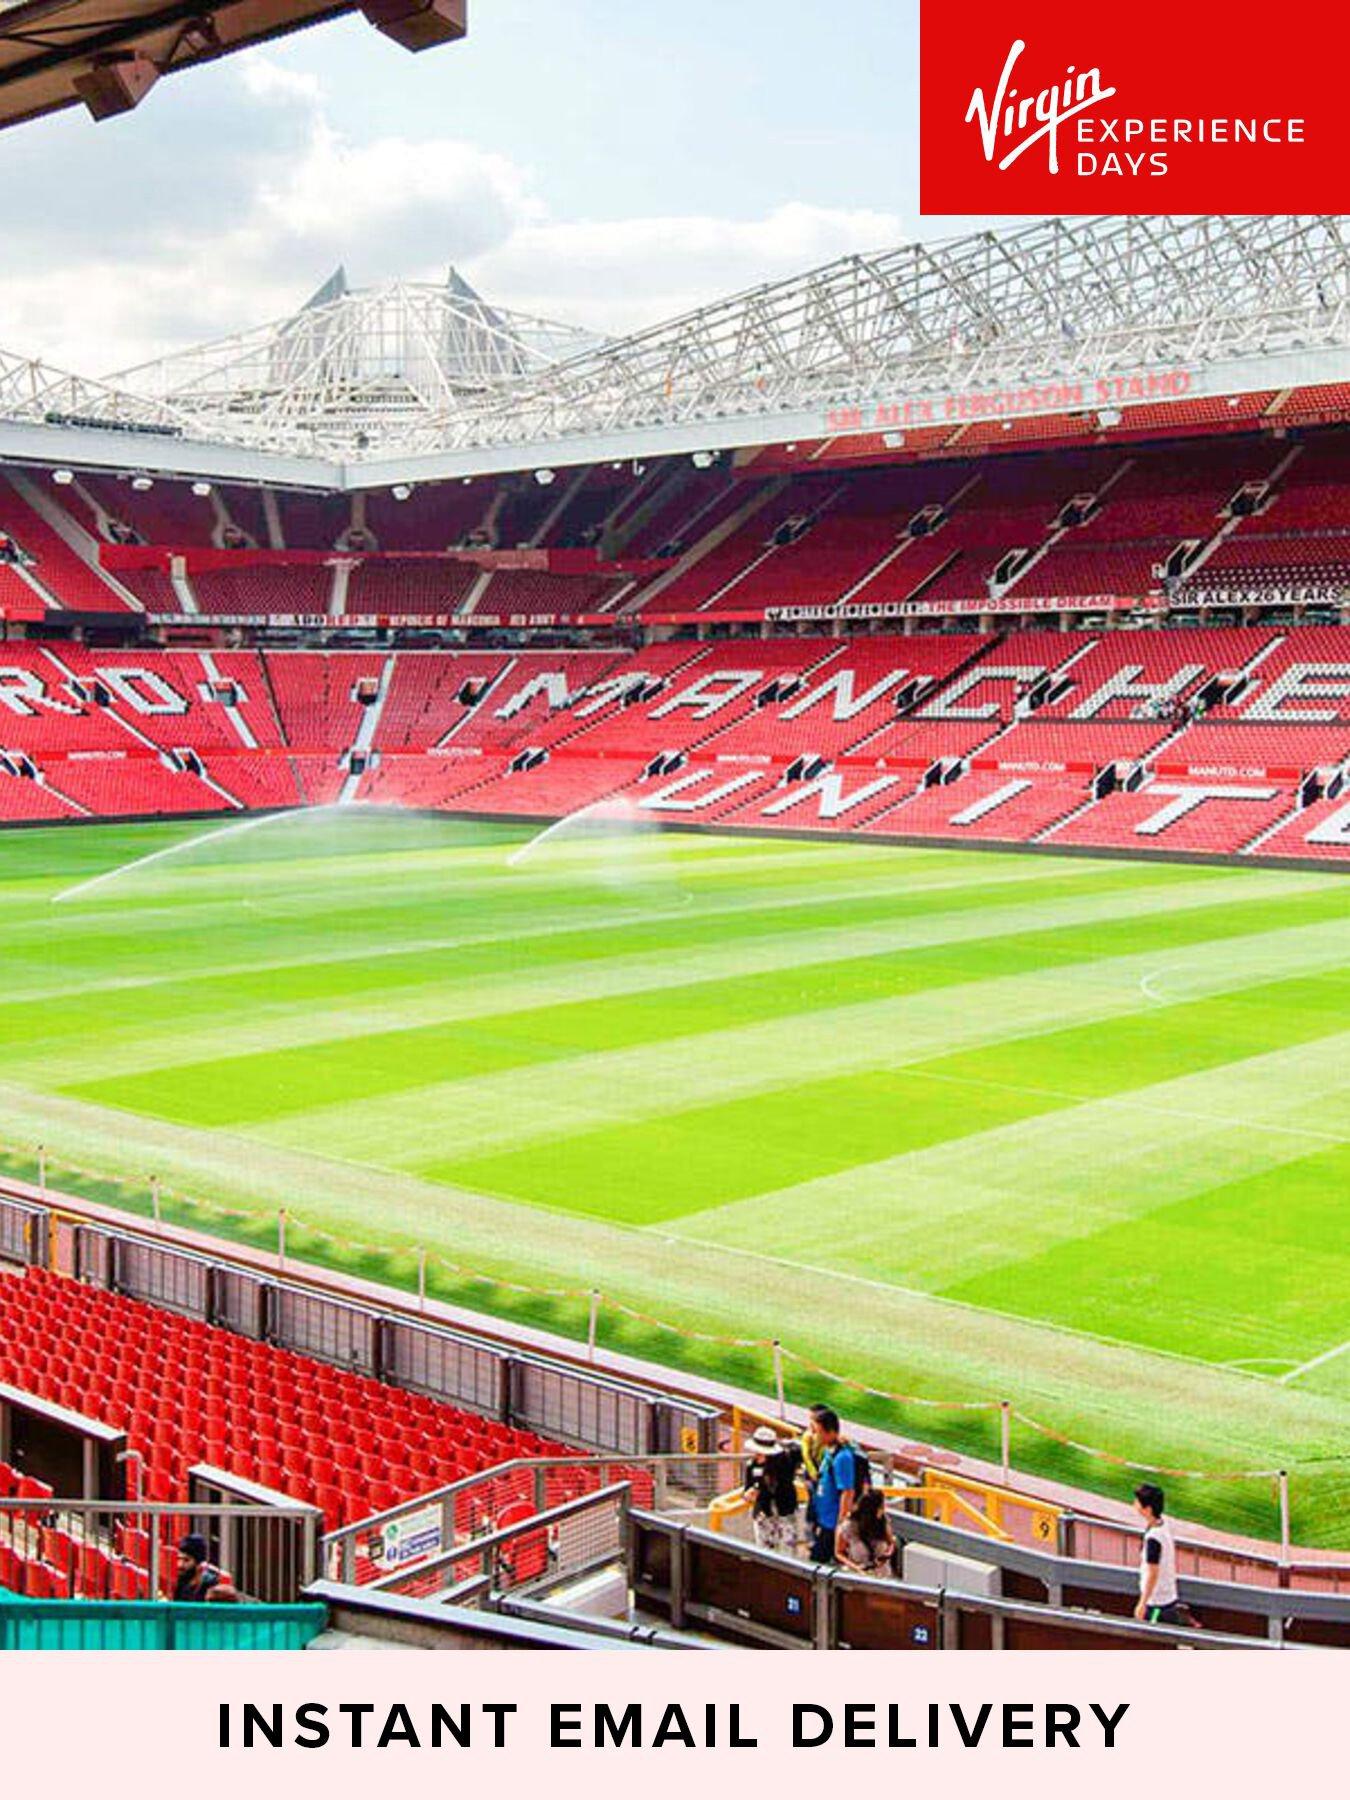  image of virgin-experience-days-digital-voucher-manchester-united-football-club-stadium-tour-for-two-adults